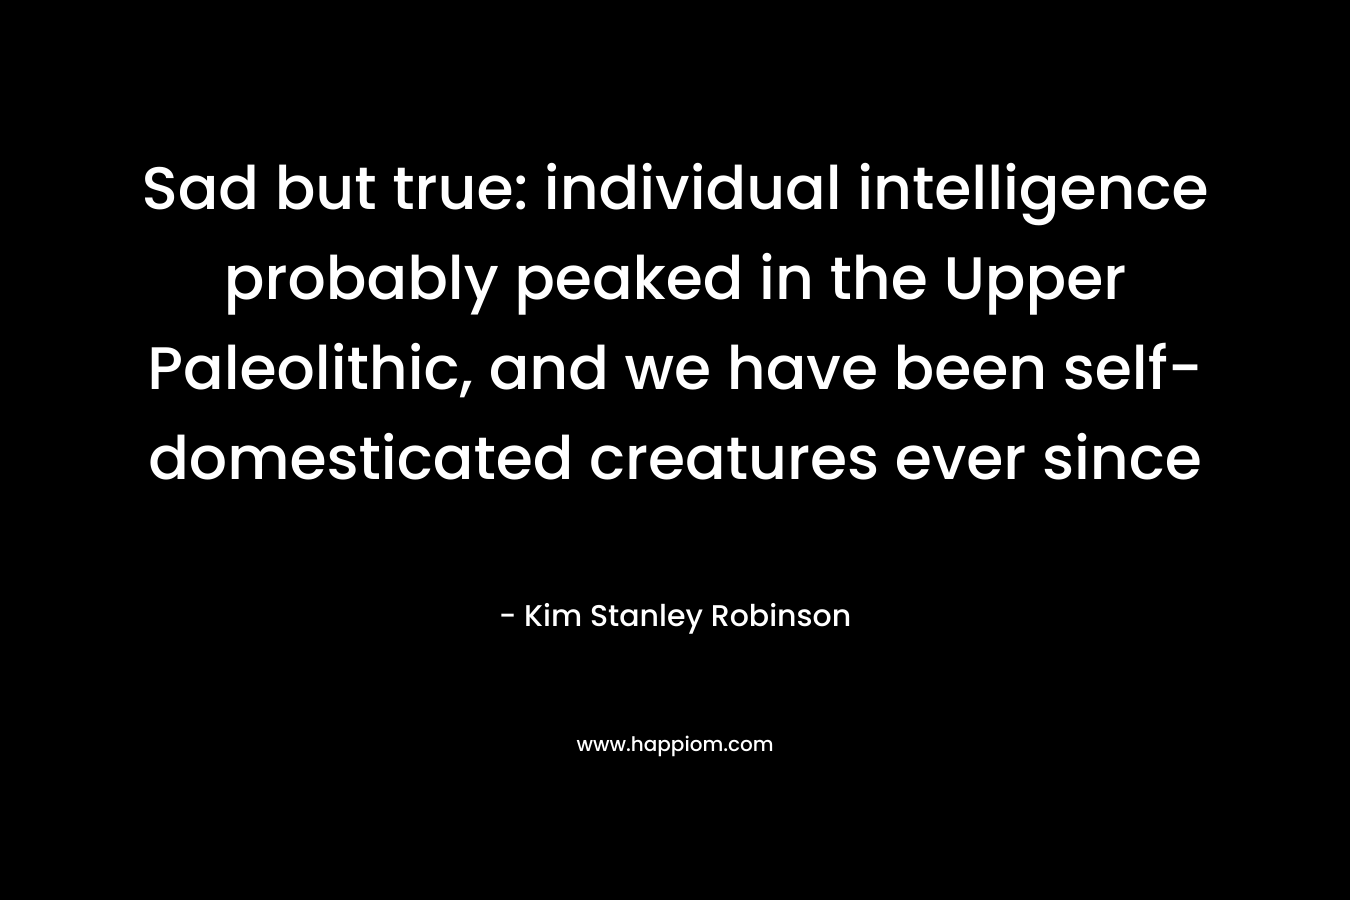 Sad but true: individual intelligence probably peaked in the Upper Paleolithic, and we have been self-domesticated creatures ever since – Kim Stanley Robinson